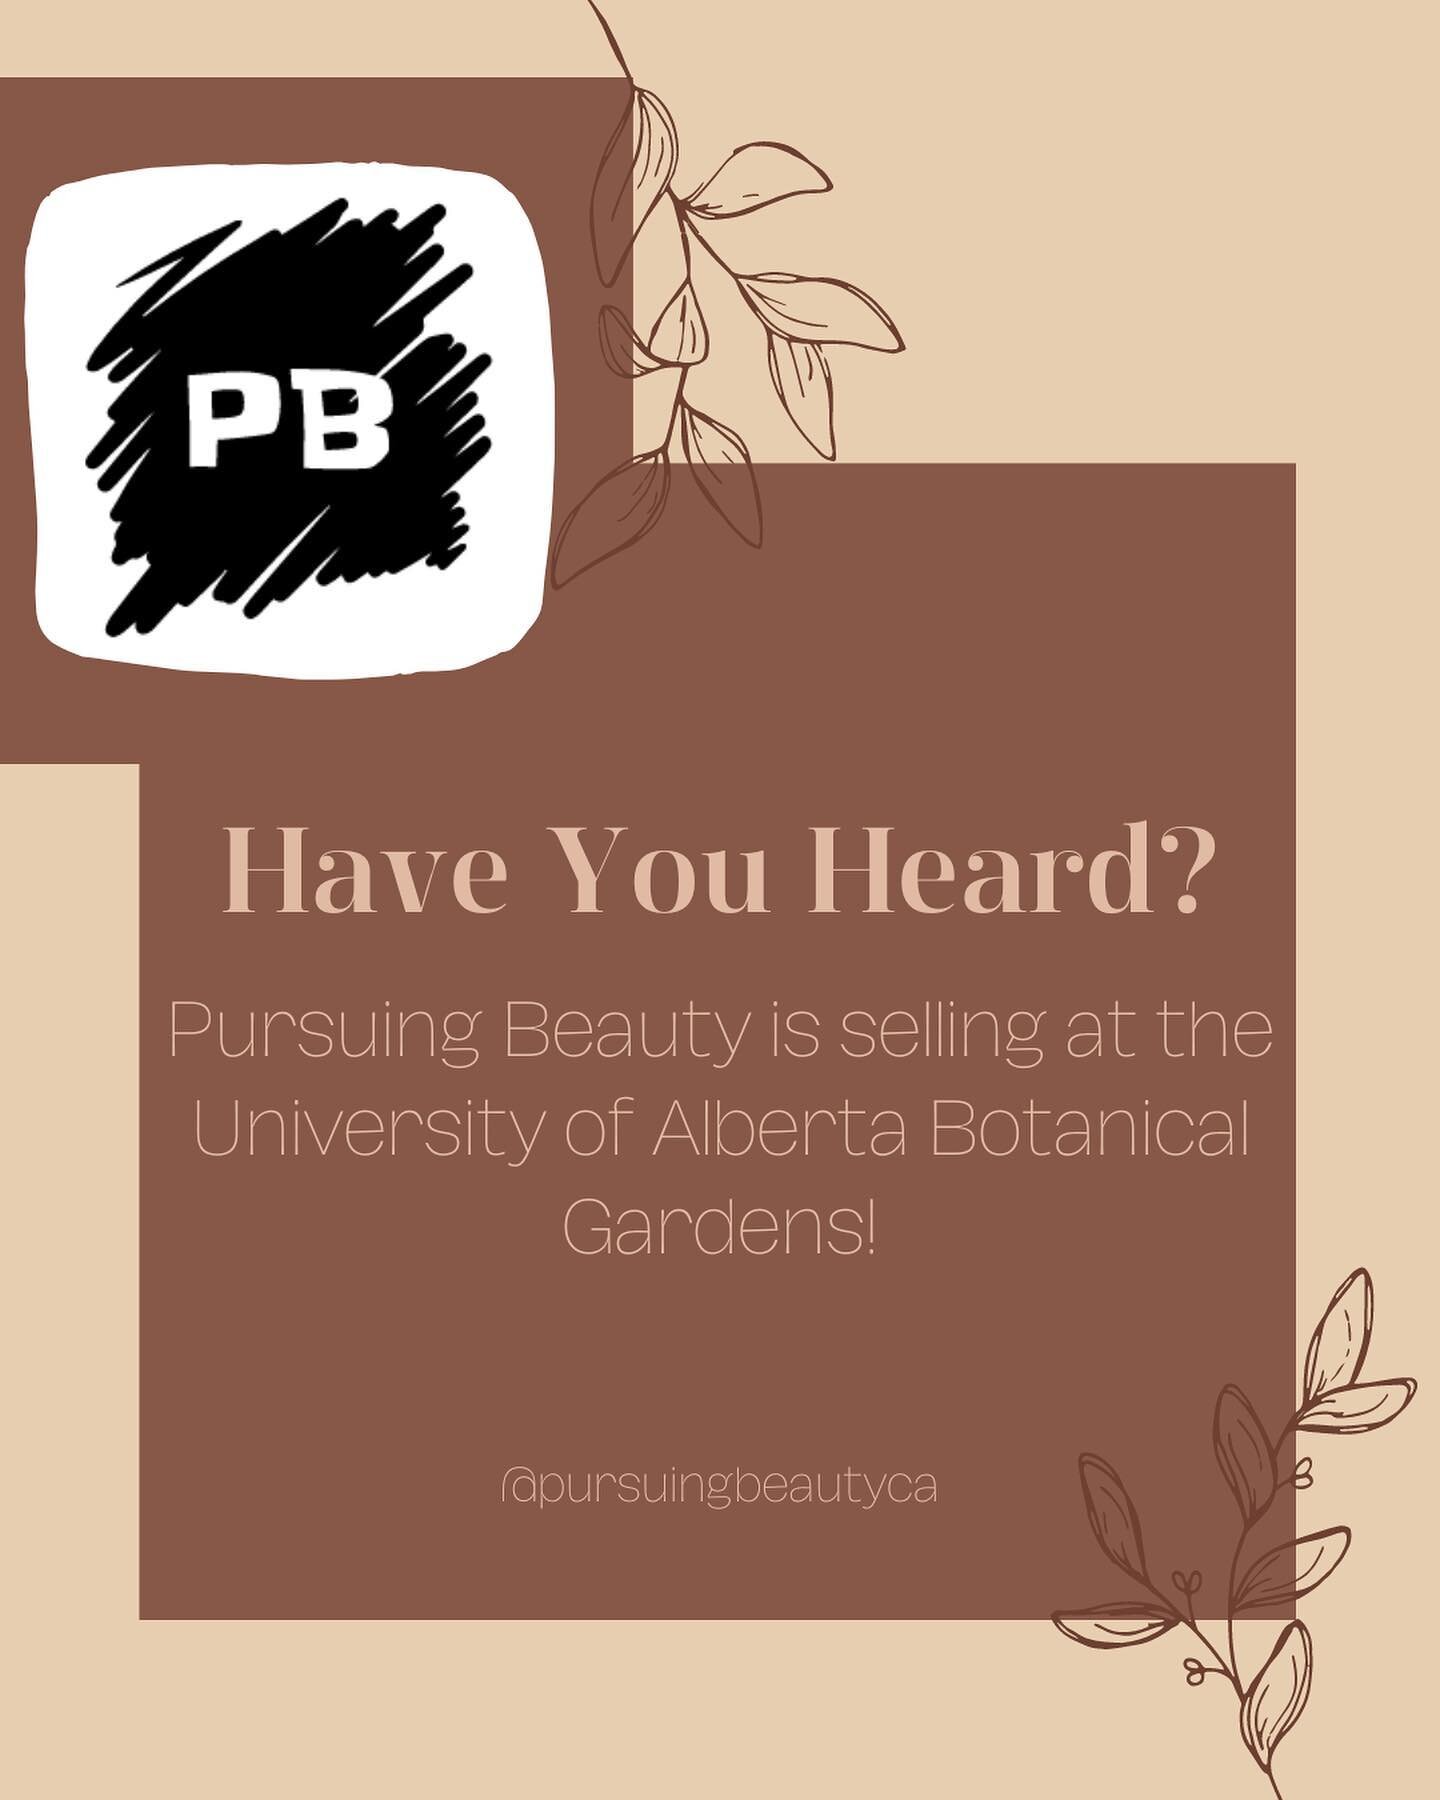 In case you missed yesterdays reel&hellip; here are the details! We are so excited to be selling here! ❤️🥰
-
Date: August 21st
Time: 11AM
Location: University of Alberta Botanical Gardens
-
Can&rsquo;t wait to see you there! 🥳🙌
-
#pursuingbeautyca